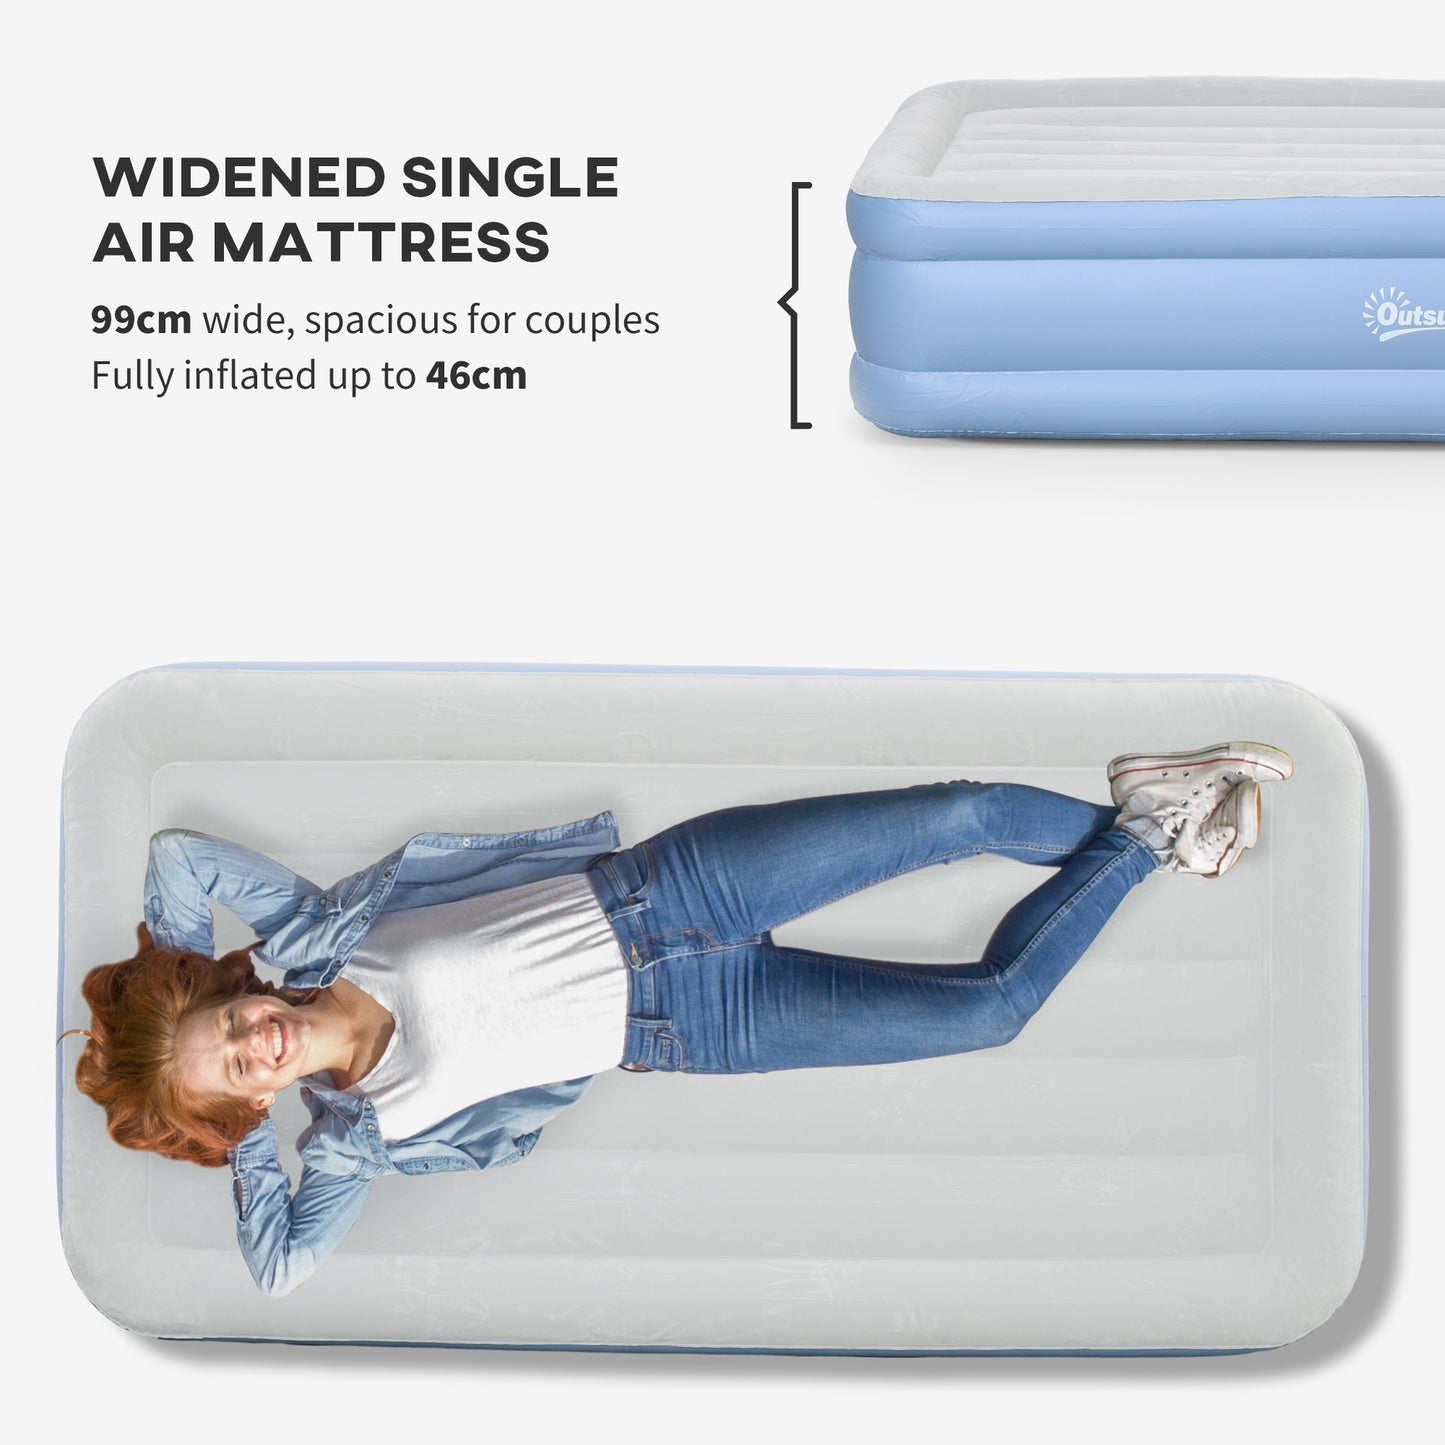 Outsunny Widened Single Inflatable Mattress, with Built-In Electric Pump